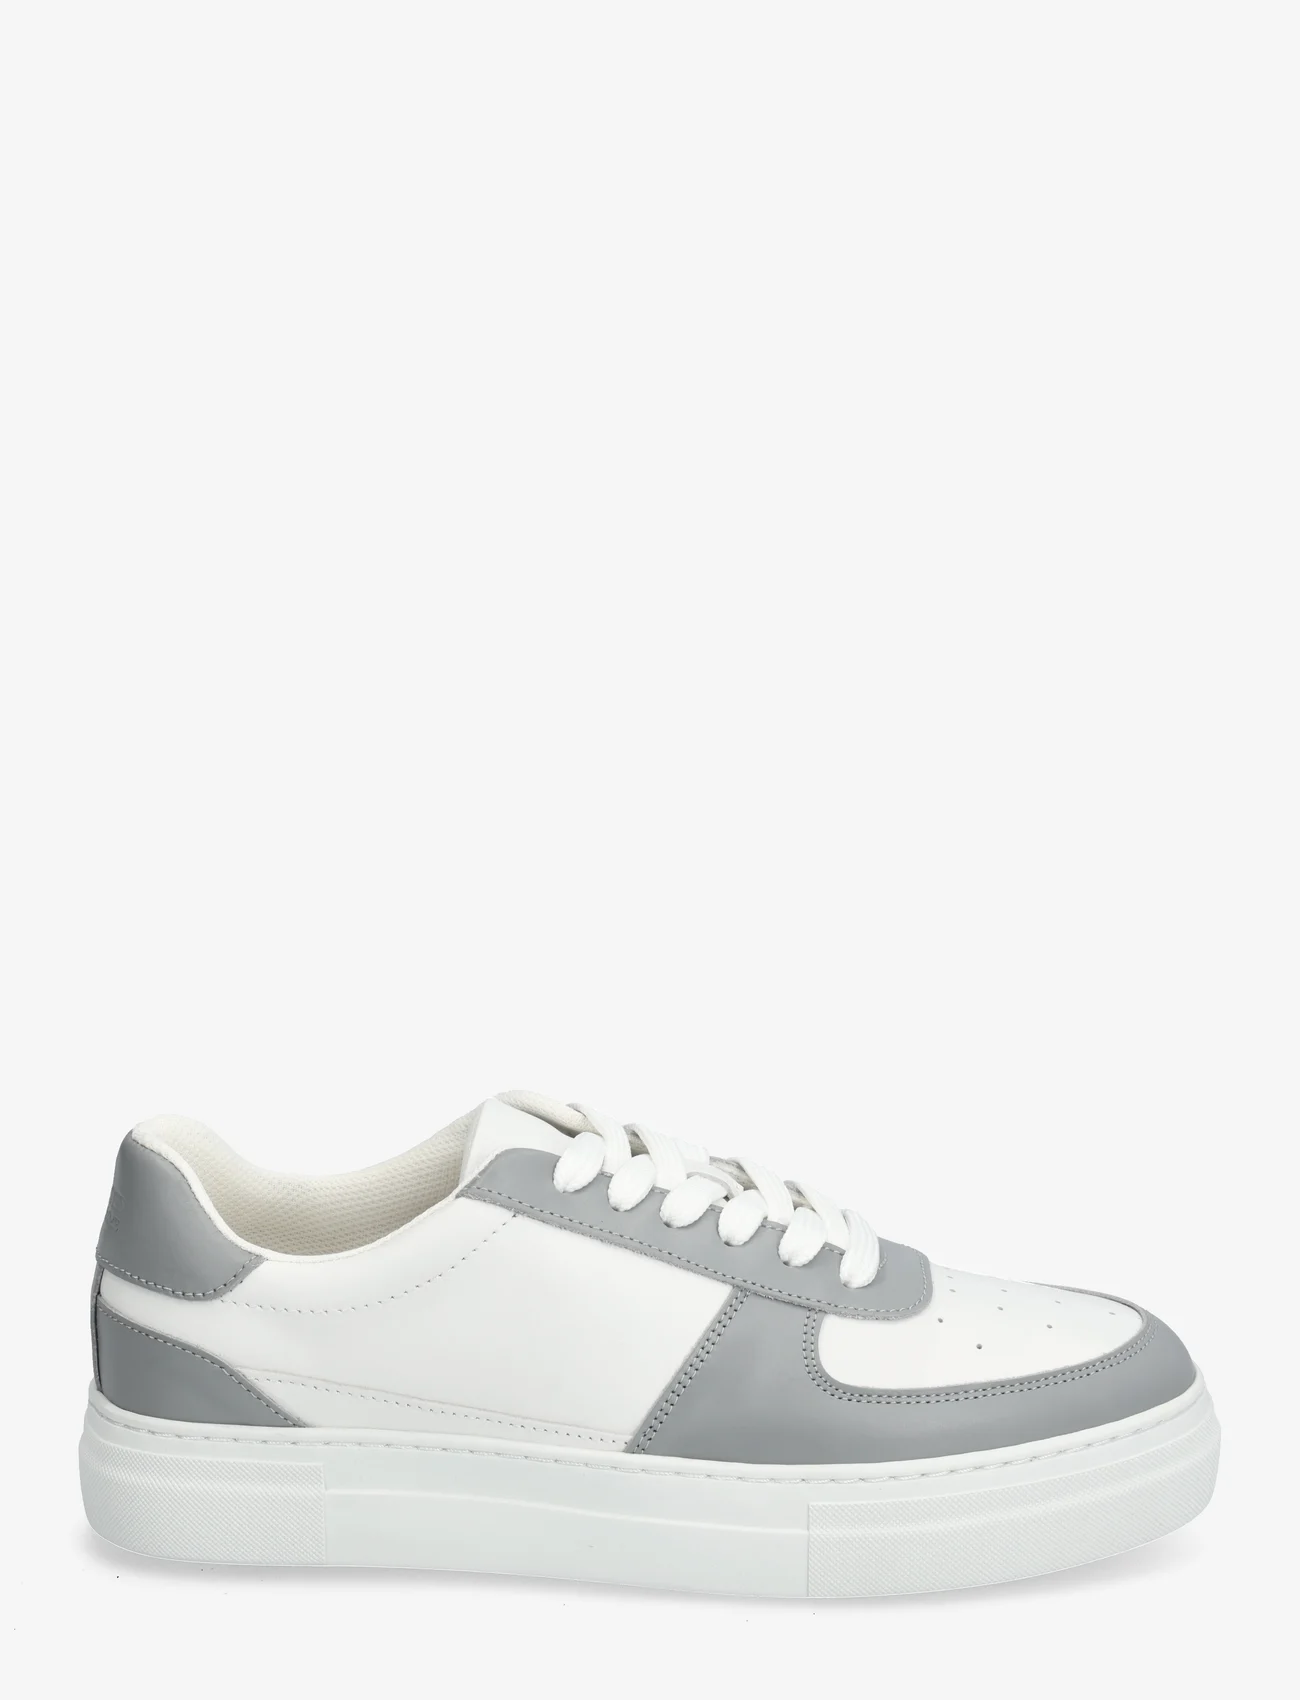 Selected Homme - SLHHARALD LEATHER SNEAKER - low tops - grey - 1